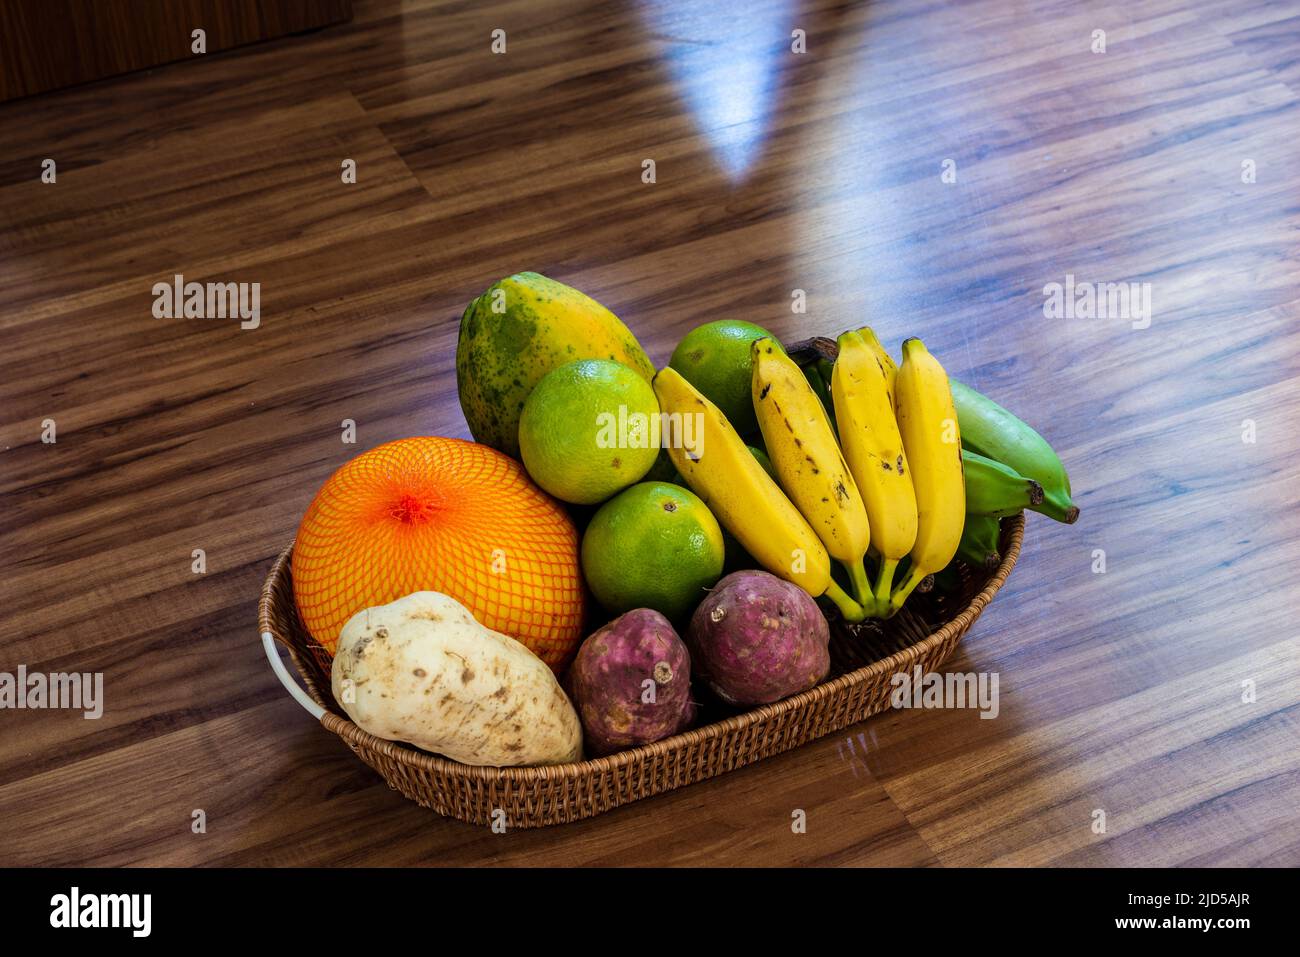 Fruits in a wooden basket on the wooden floor. Salvador, Bahia, Brazil. Stock Photo